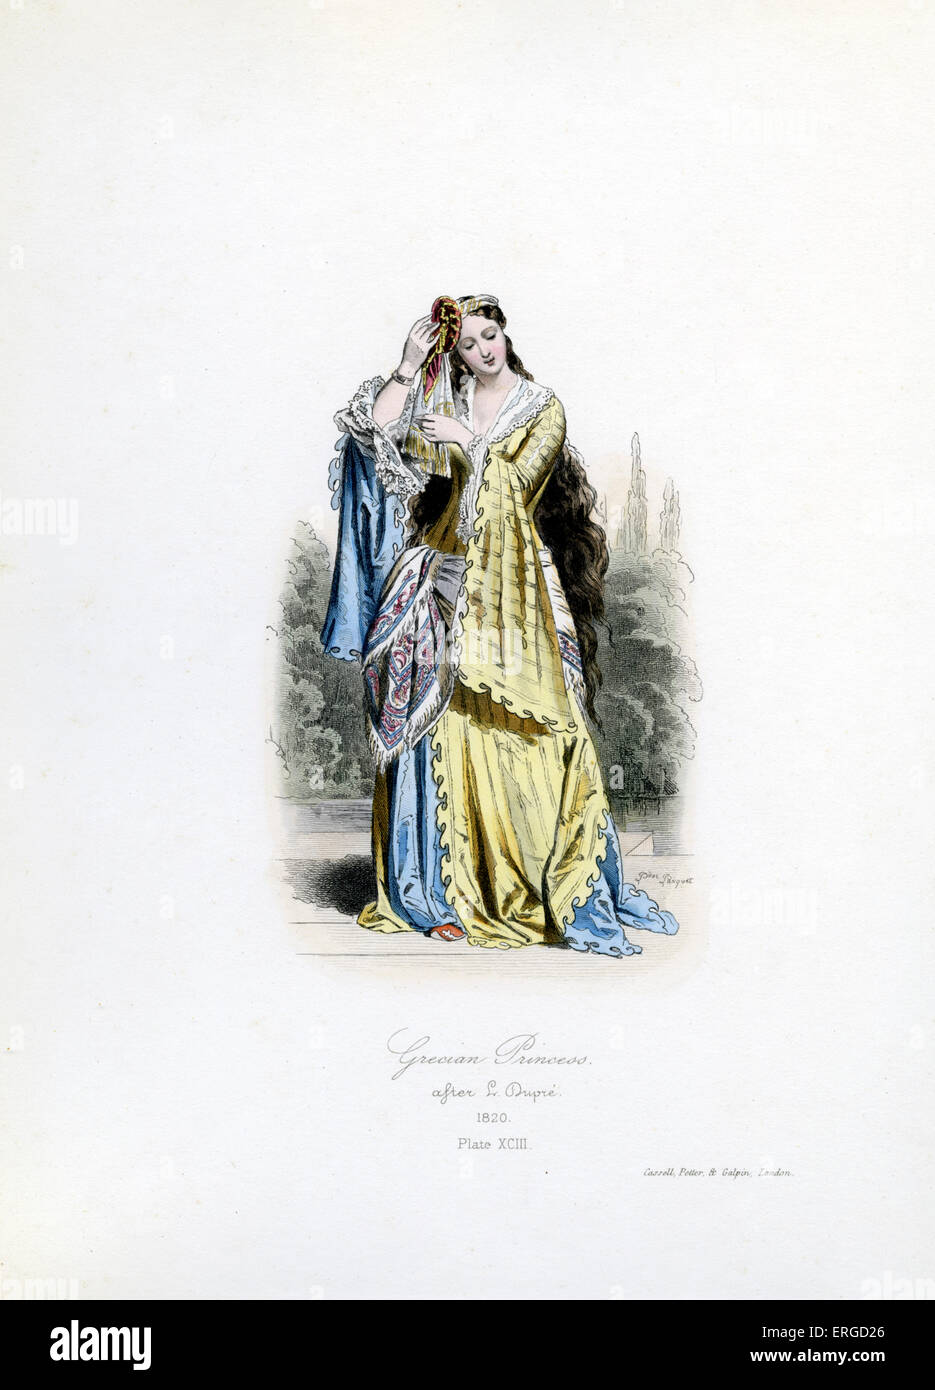 Grecian princess, 1820 - from engraving by Polidor Pauquet after L. Dupré. Plate XCIII. Stock Photo